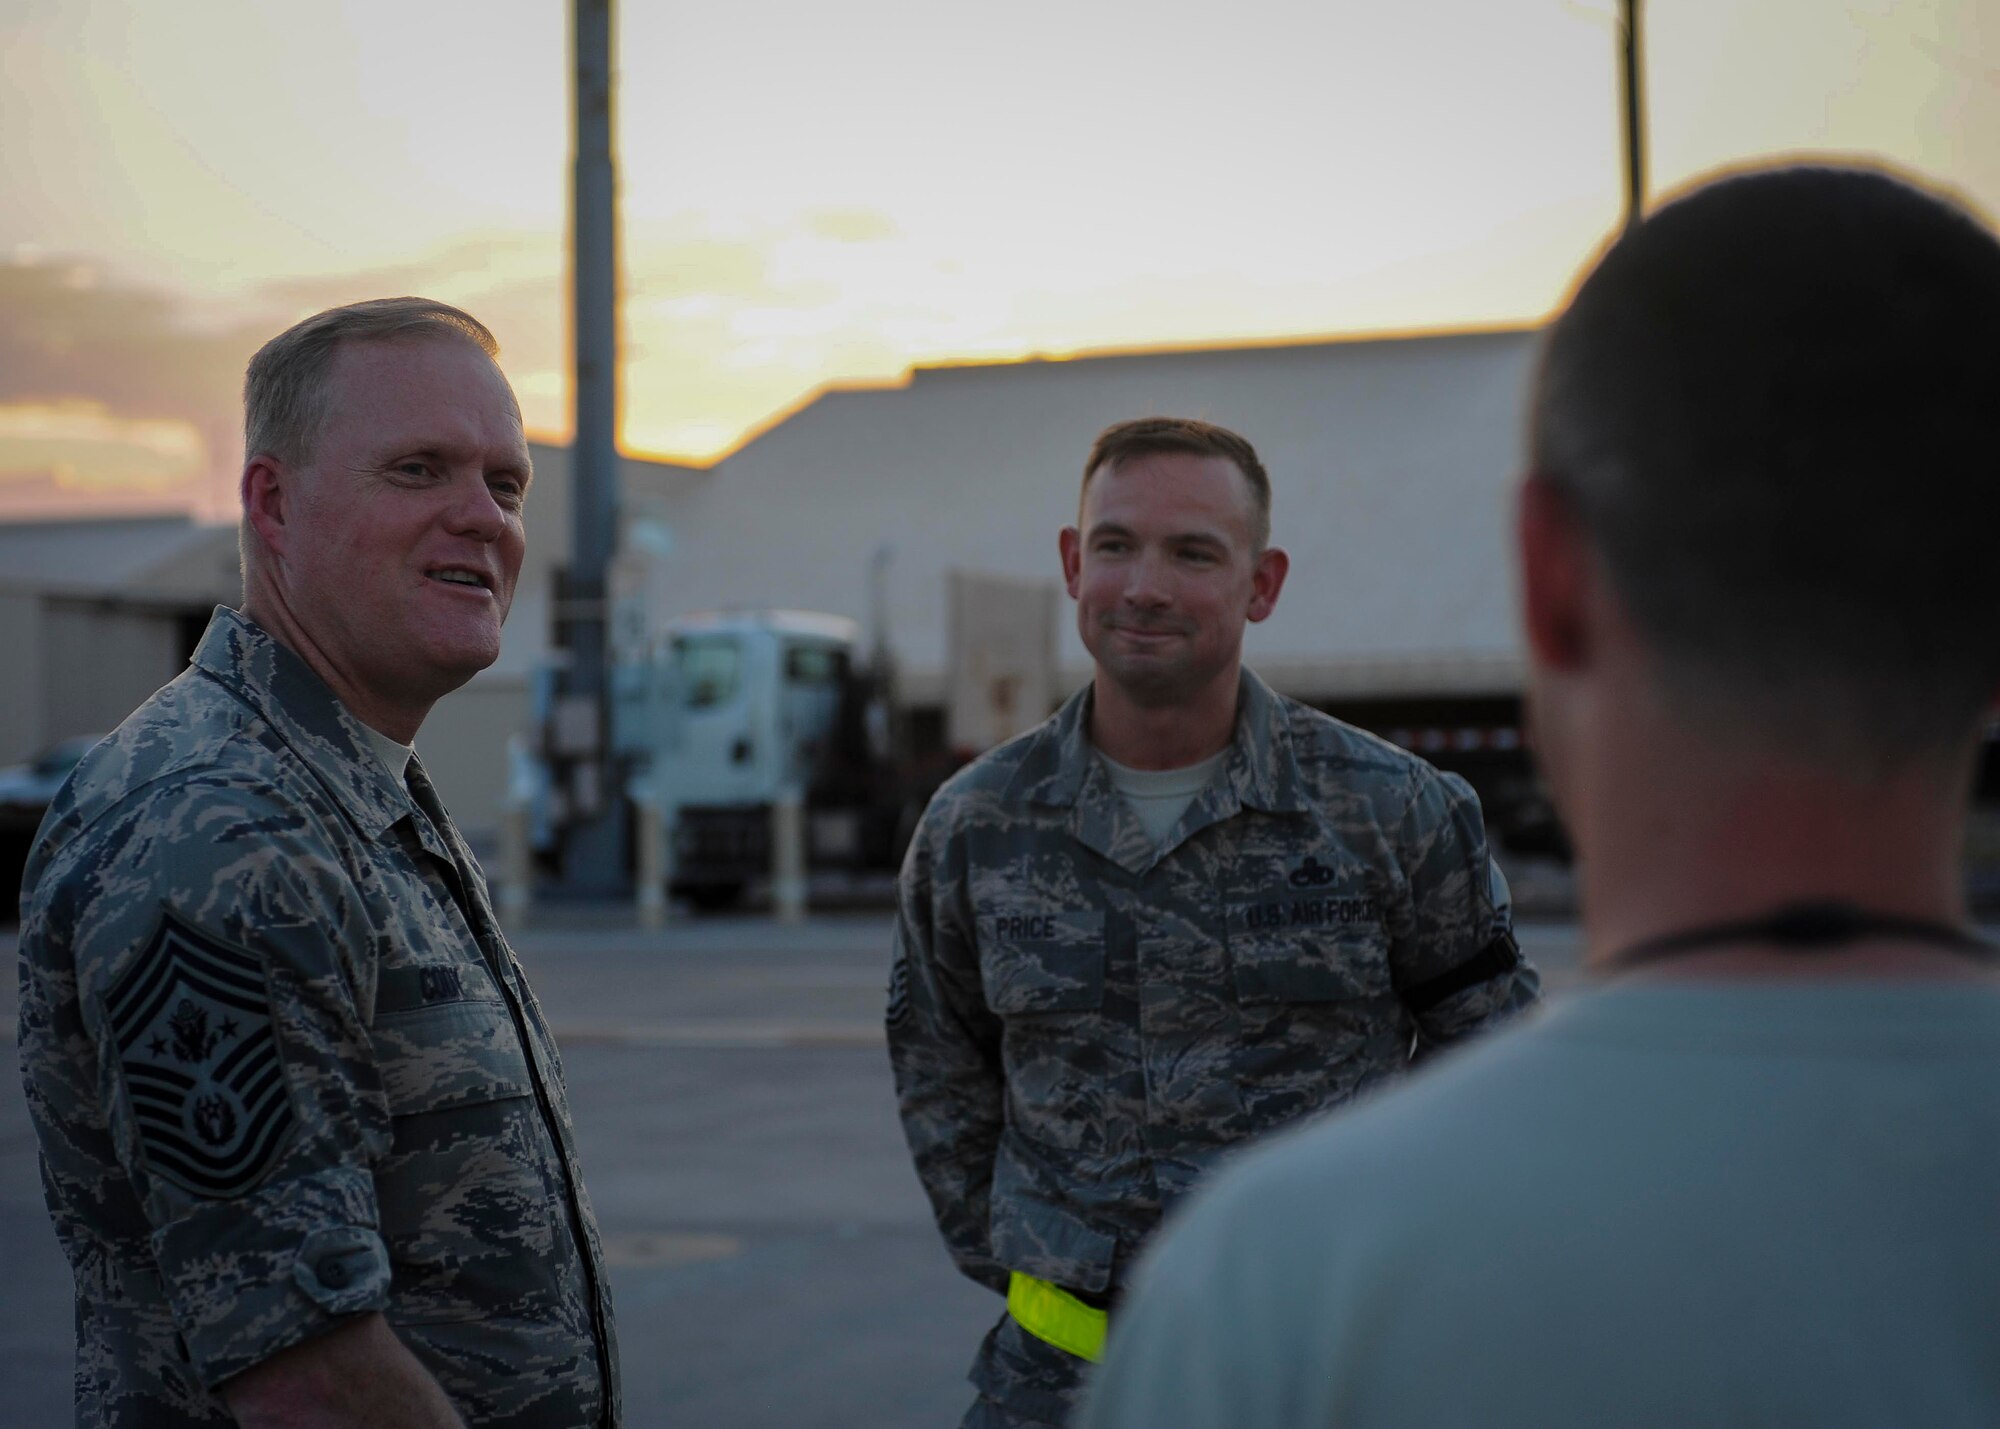 Chief Master Sgt. of the Air Force James A. Cody speaks with Airmen from Joint Base Langley-Eustis, Va. during a meet and great on the flightline at Nellis Air Force Base, Nev., July 27, 2016. During Cody’s visit, Airmen from around the Air Force are temporarily deployed to Nellis AFB for Red Flag 16-3 where they will train for three weeks in air, space and cyberspace. (U.S. Air Force photo by Senior Airman Jake Carter/Released)